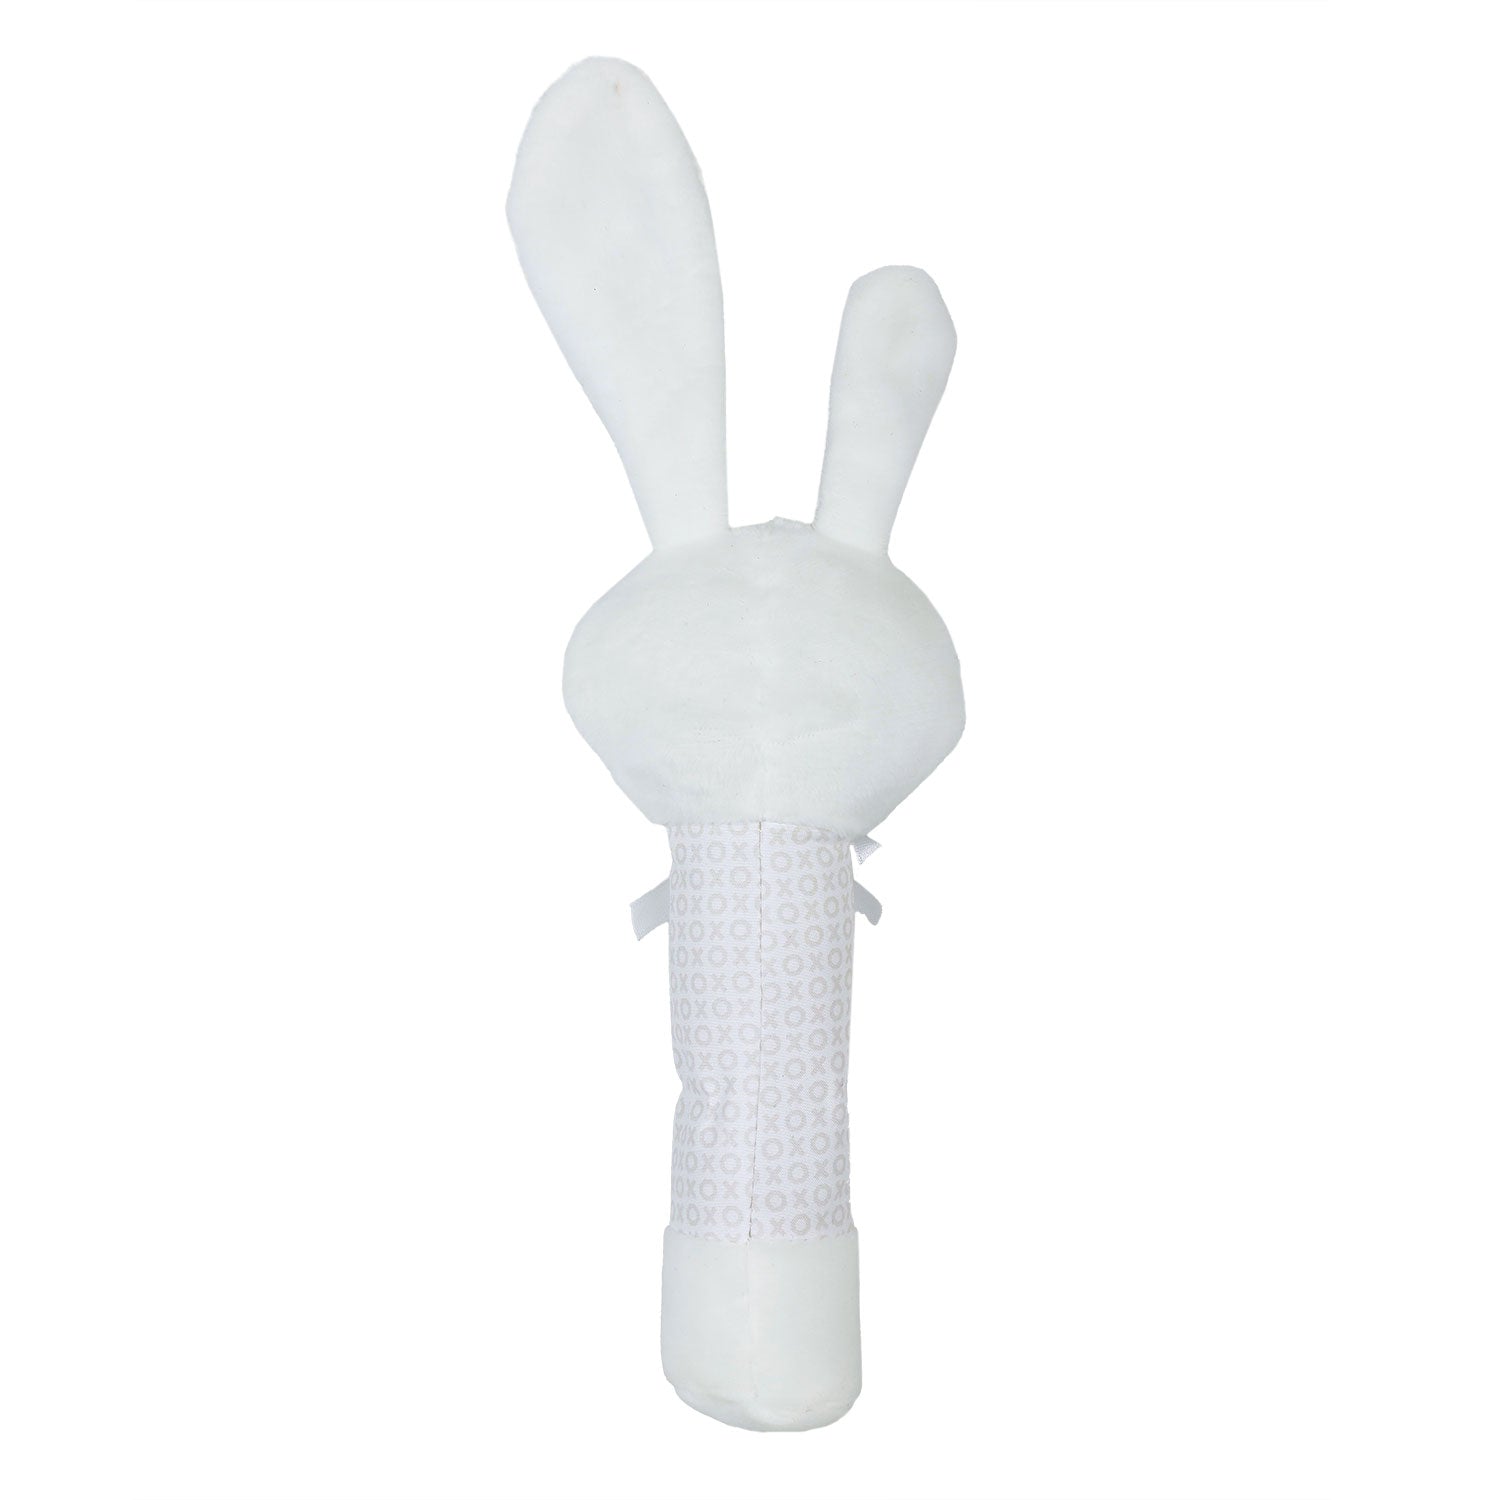 Baby Moo Cuddle Bunny Squeaker Sound Handheld Rattle Toy - White